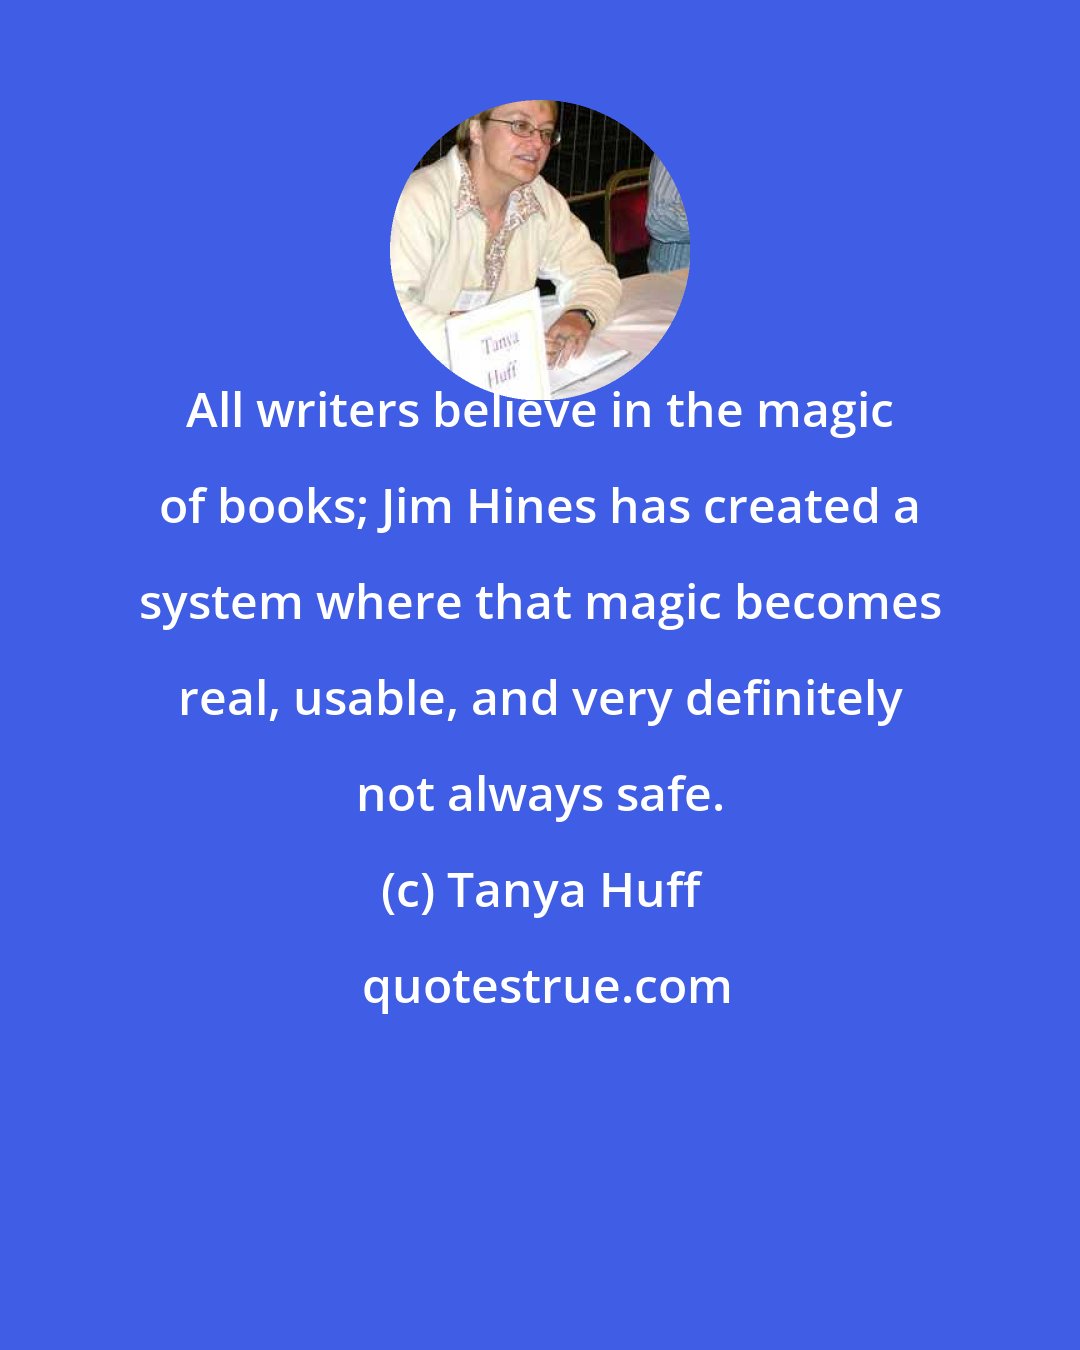 Tanya Huff: All writers believe in the magic of books; Jim Hines has created a system where that magic becomes real, usable, and very definitely not always safe.